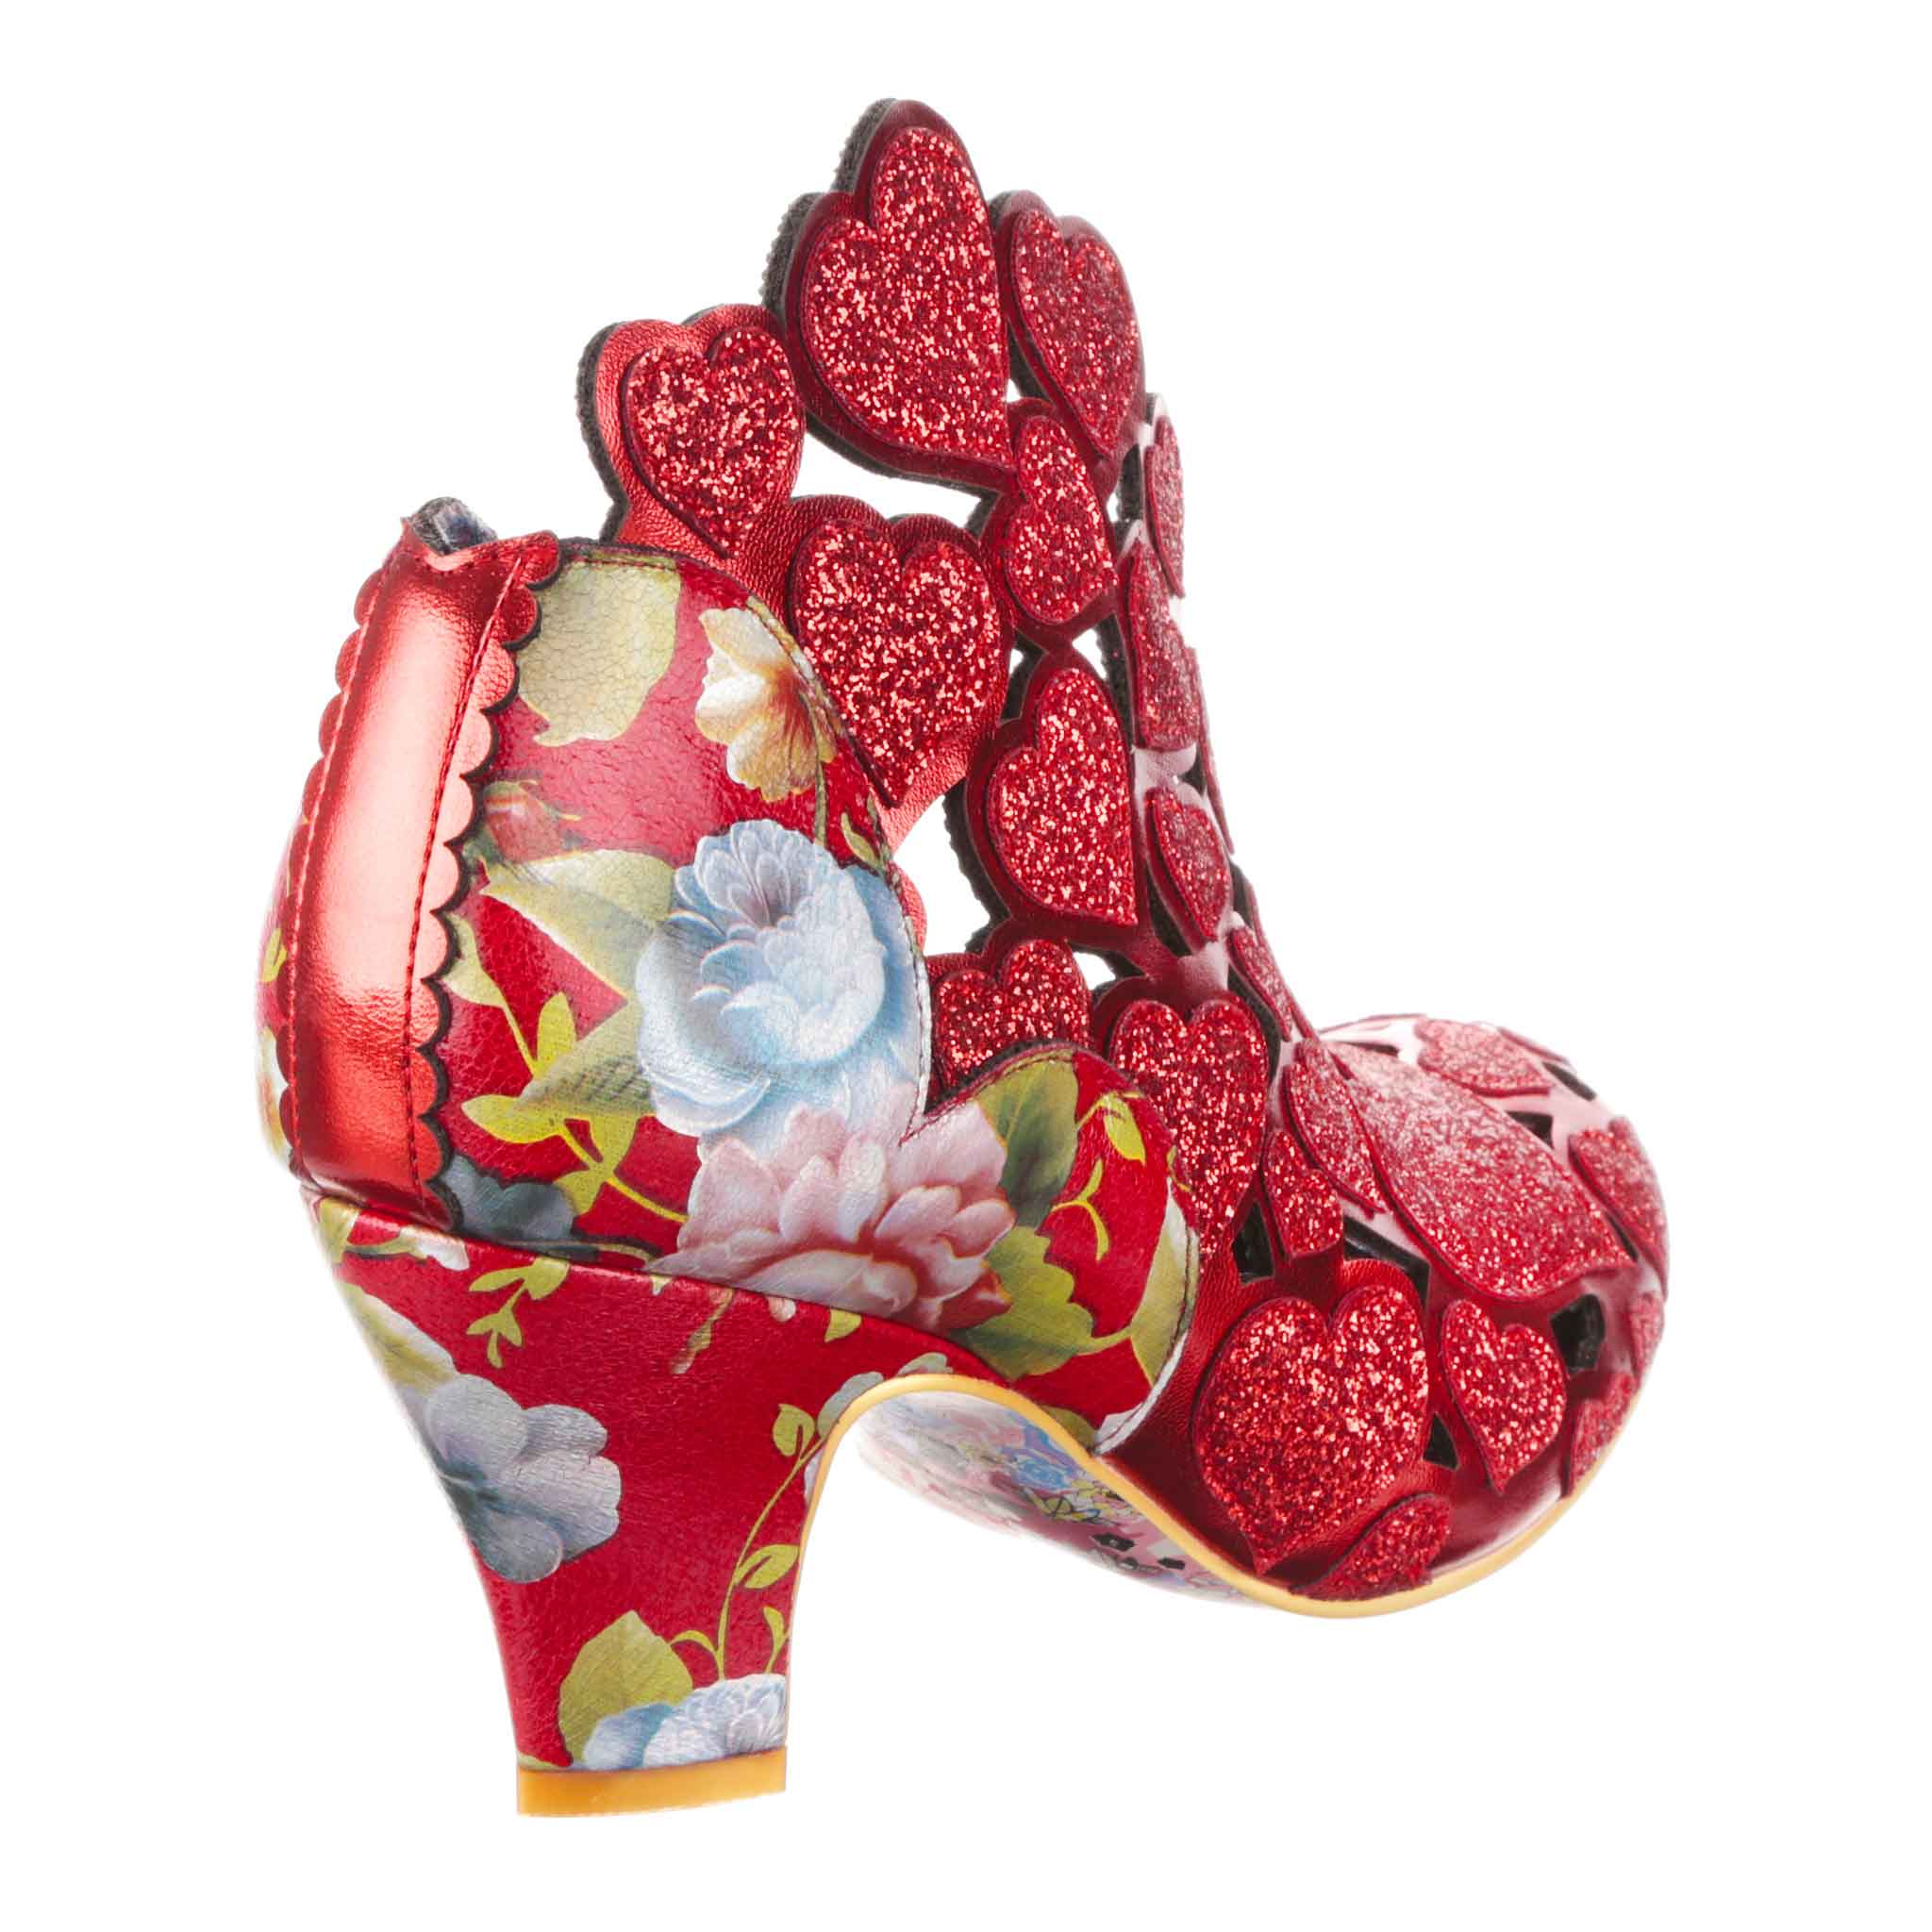 Twinkle Toes – Irregular Choice in London, England – FoodWaterShoes